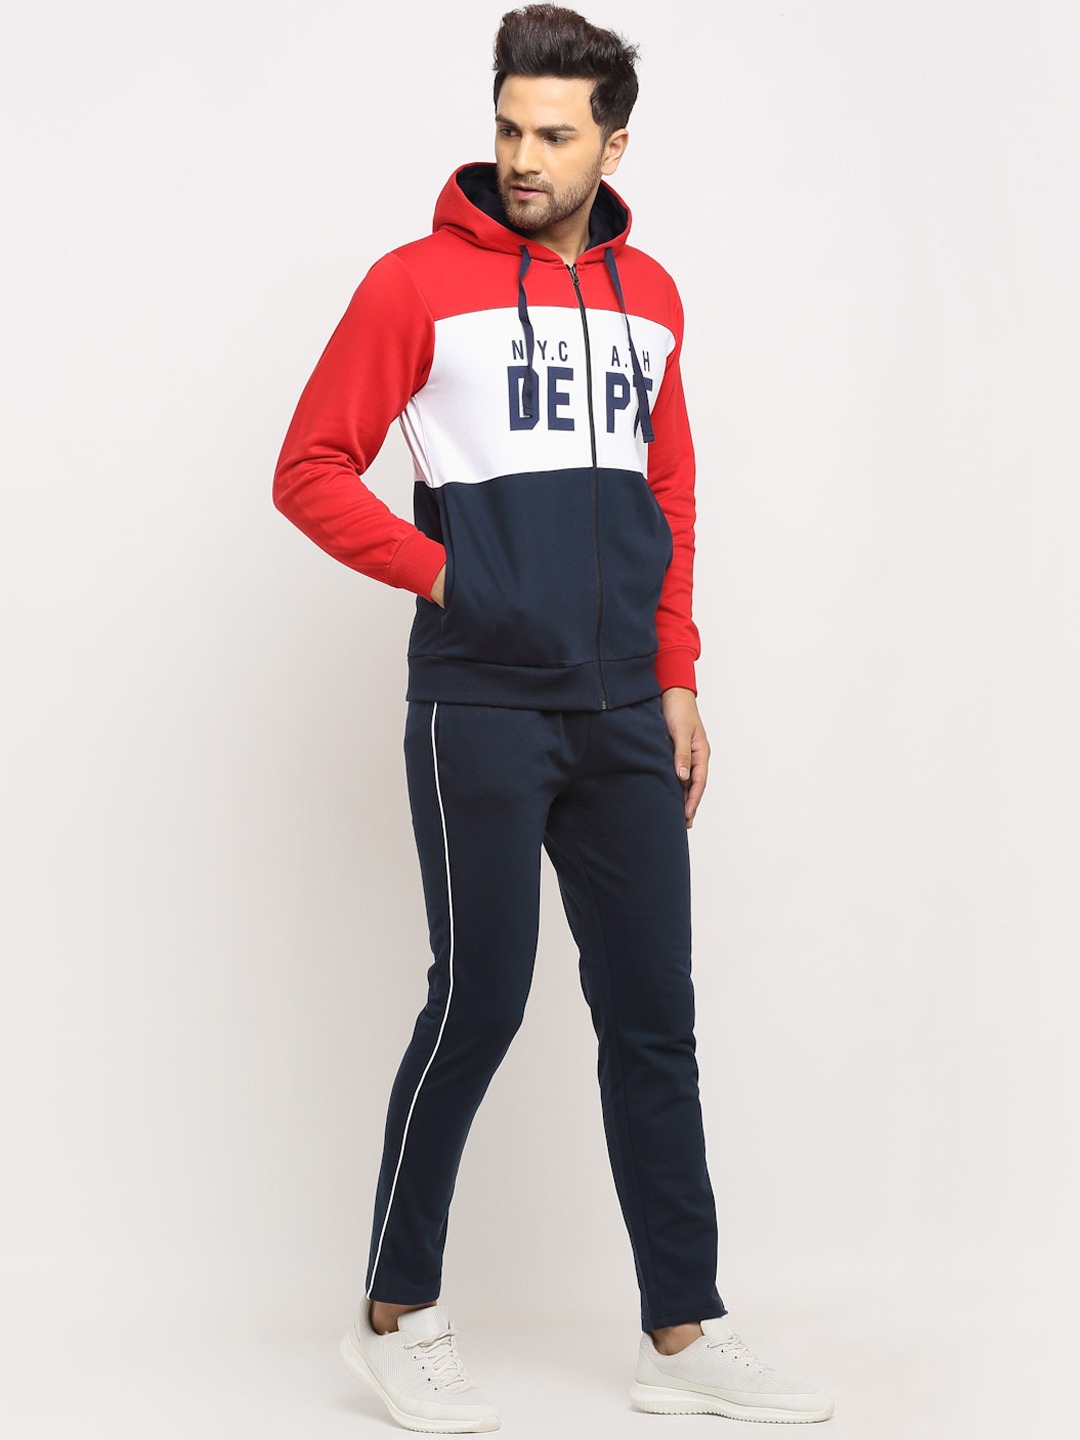 Clothing Tracksuits | WILD WEST Men Navy Blue & Red Colourblocked Cotton Tracksuits - EZ52141